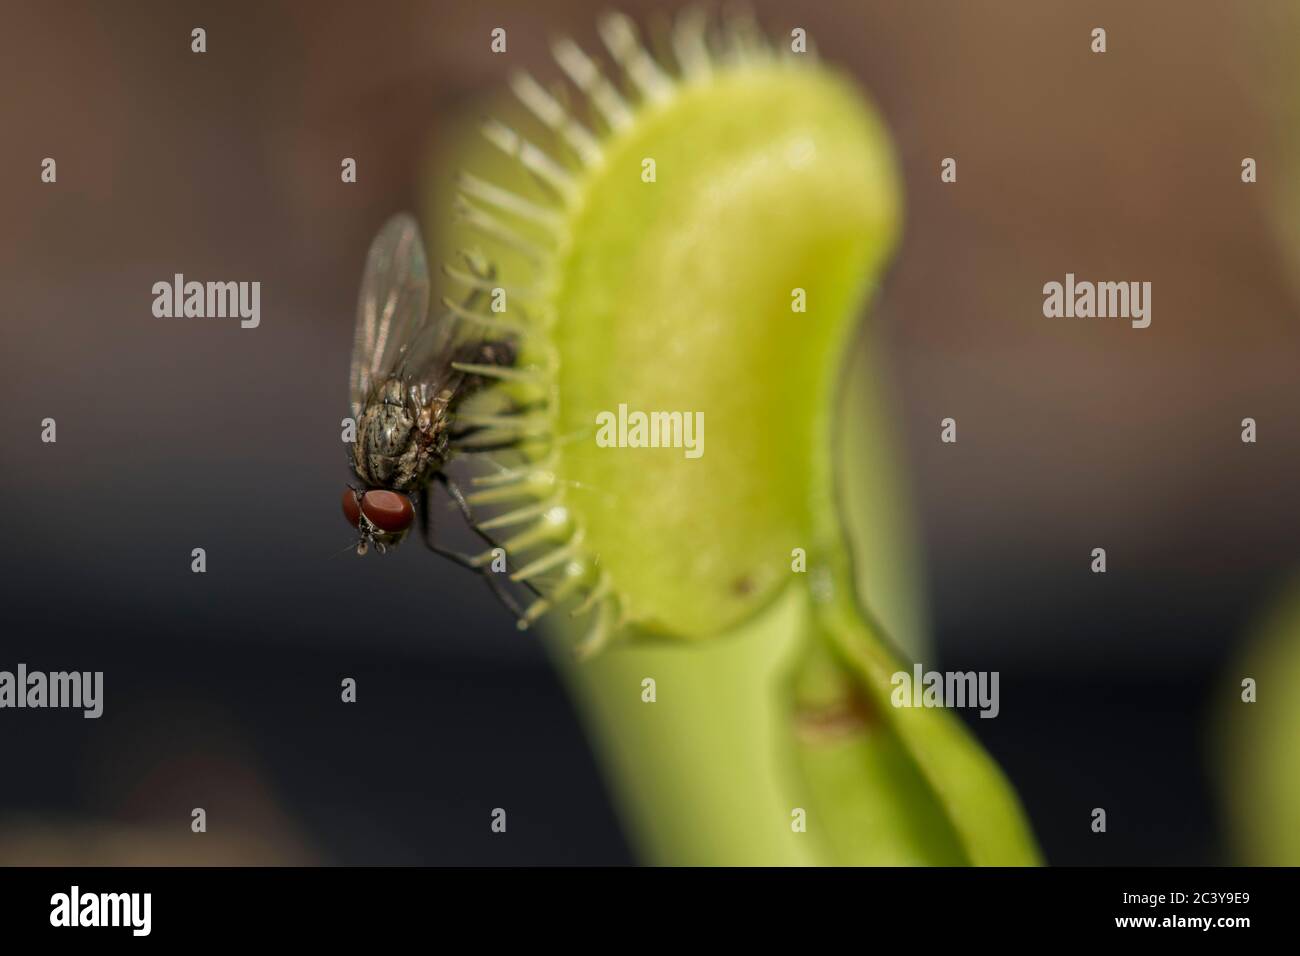 Fly caught in fly trap dolly zoom in macro insect world. Fly caught in a bug eating plant trying to get free. Stock Photo